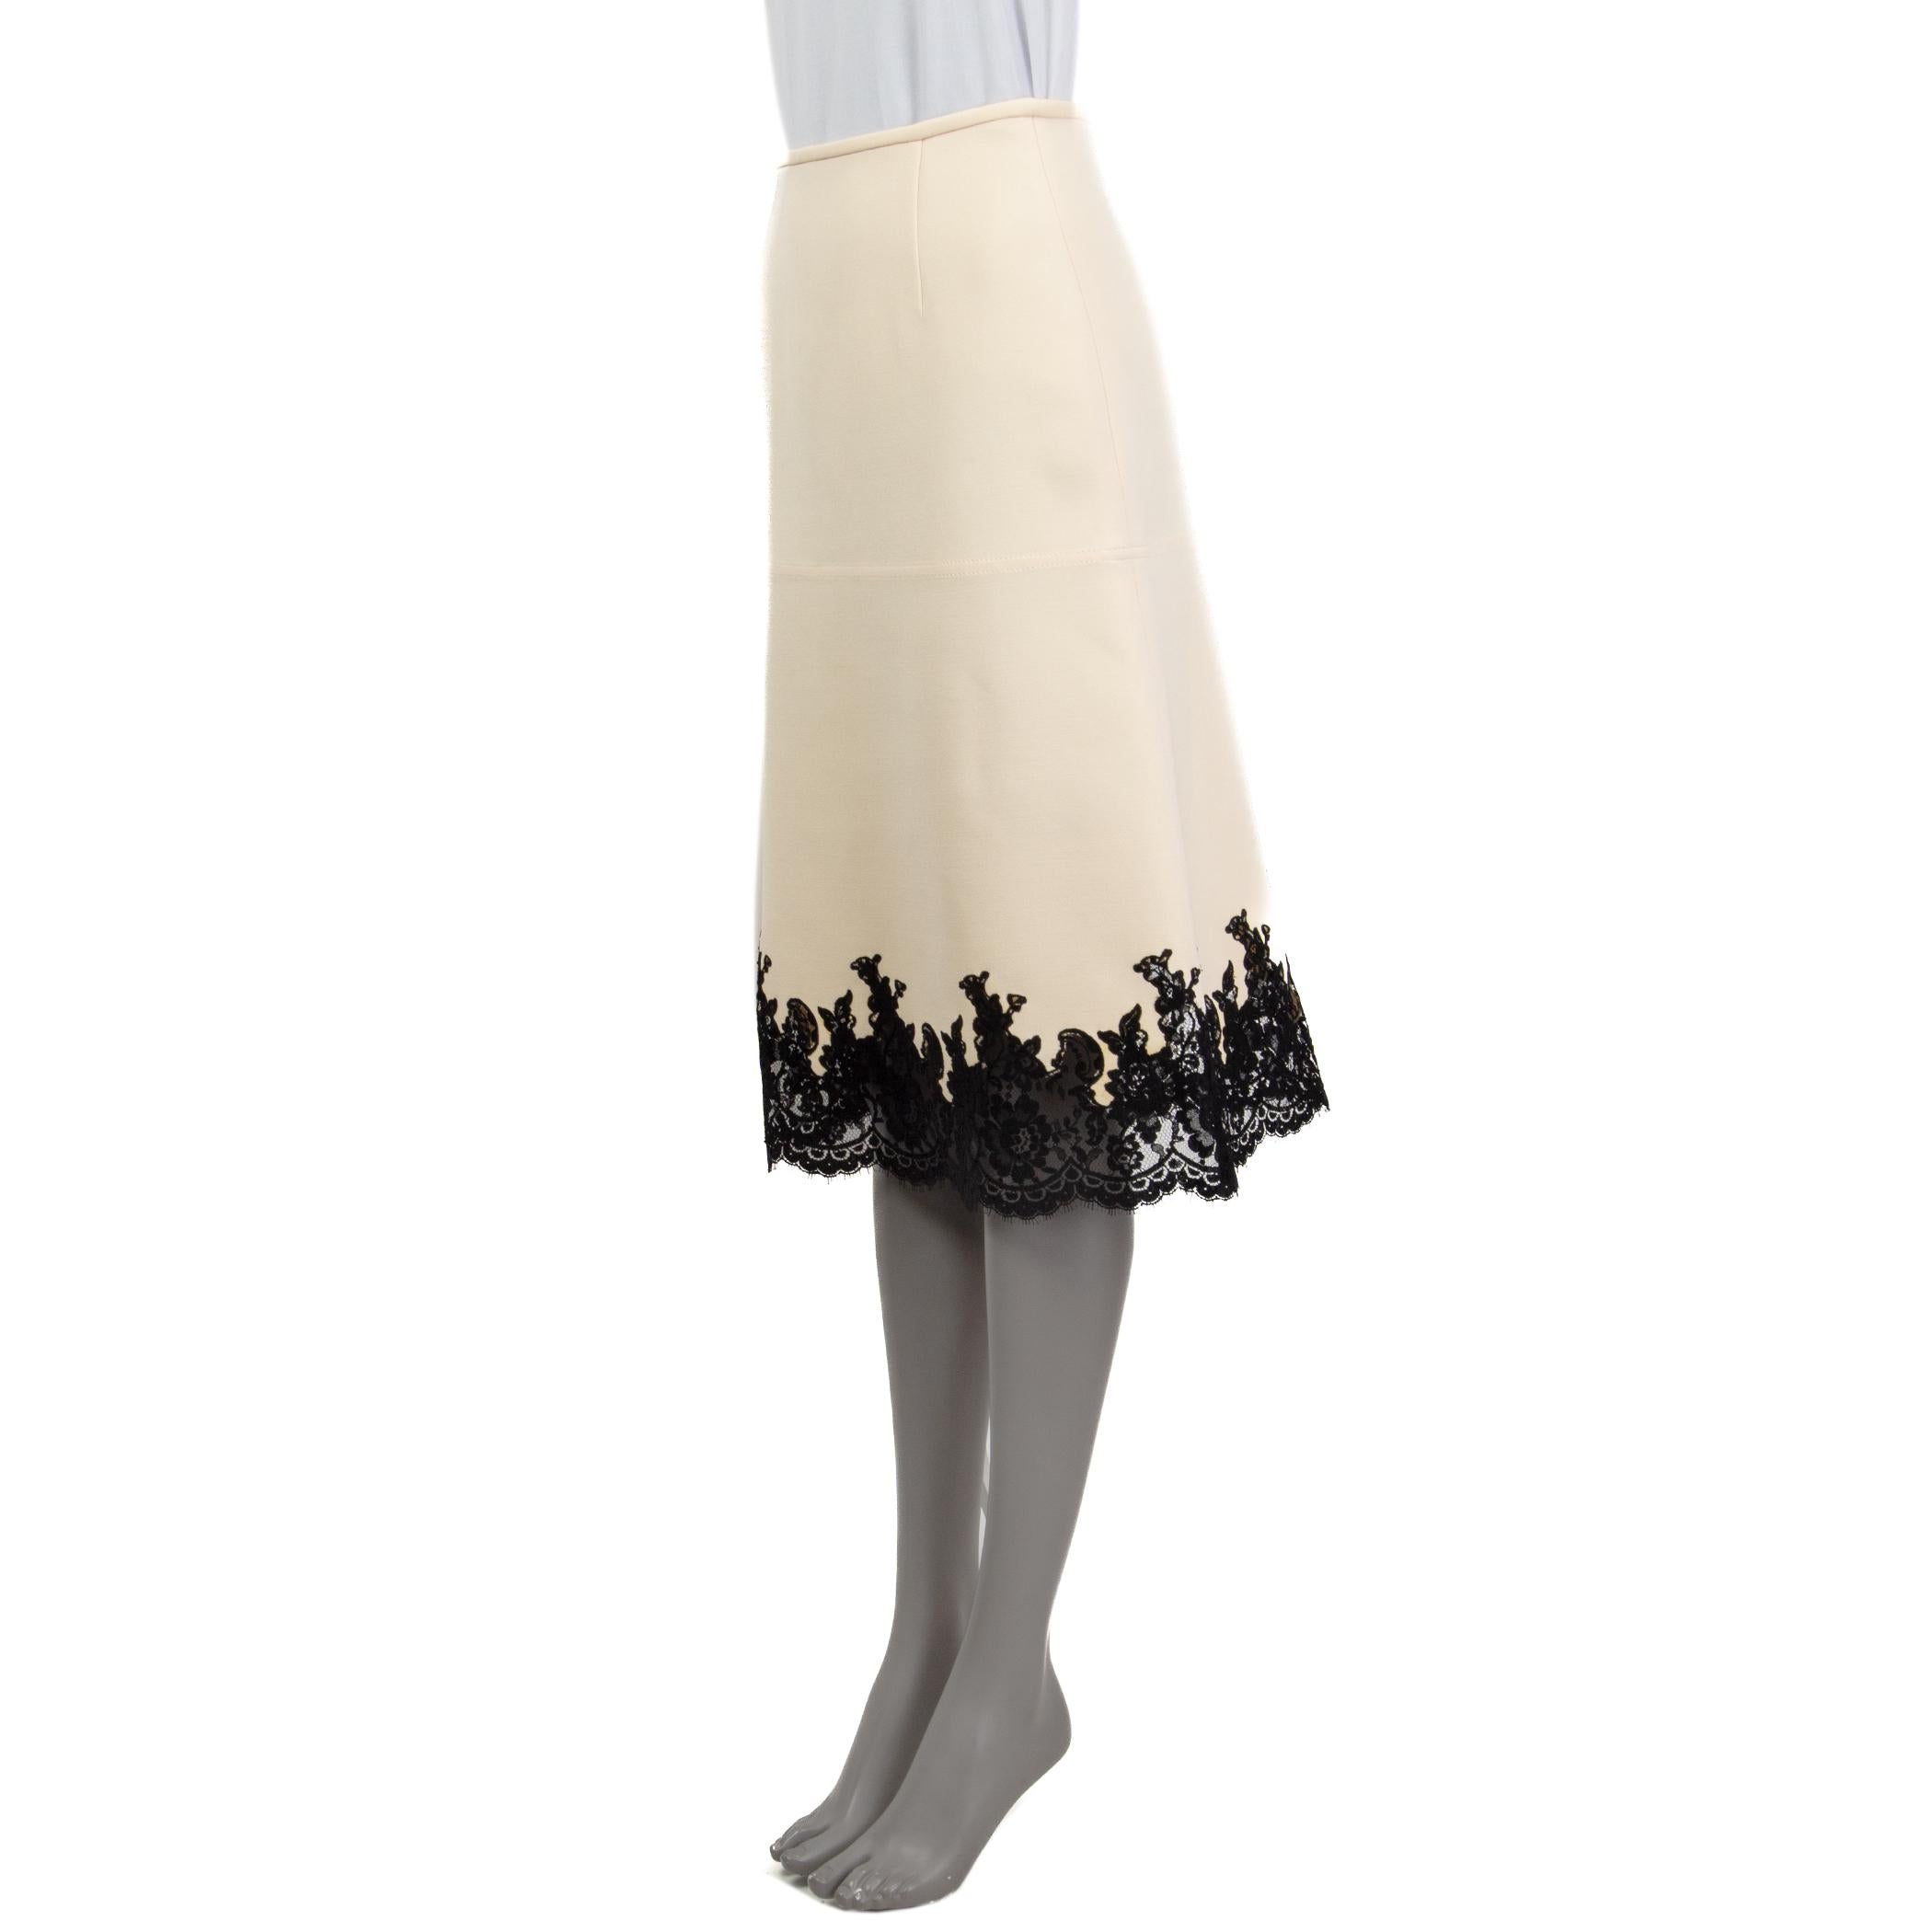 100% authentic Céline a-line knee-length skirt in cream wool and elastane (assumed cause tag is missing). Has a black lace trim. Opens with a concealed zipper and a button at the back. Unlined. Has been worn and is in excellent